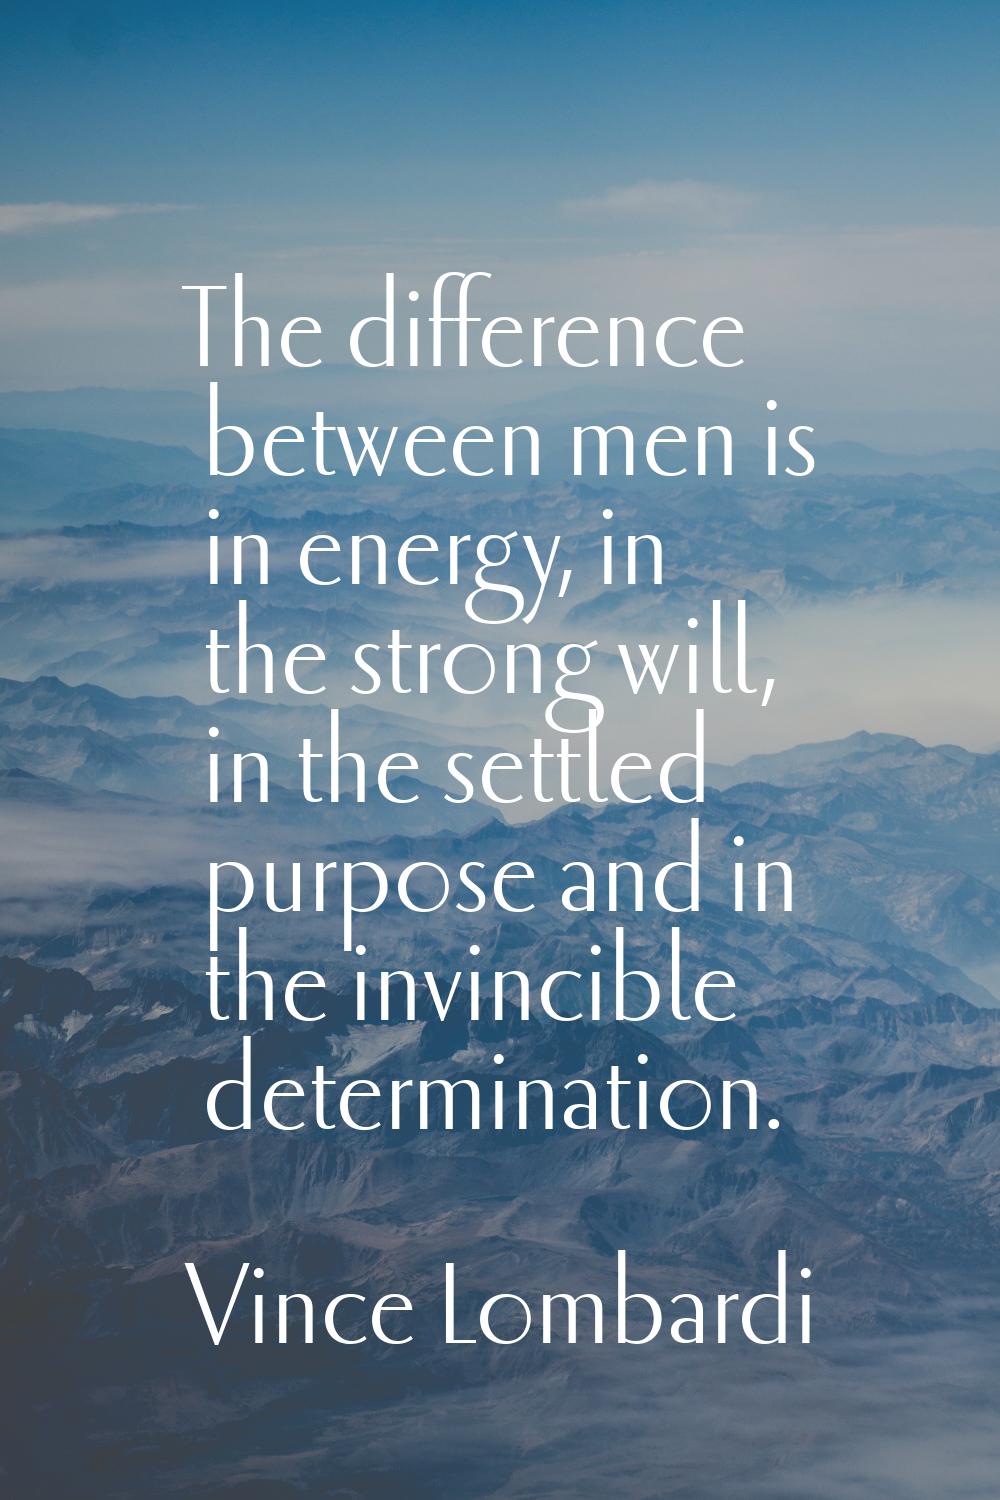 The difference between men is in energy, in the strong will, in the settled purpose and in the invi